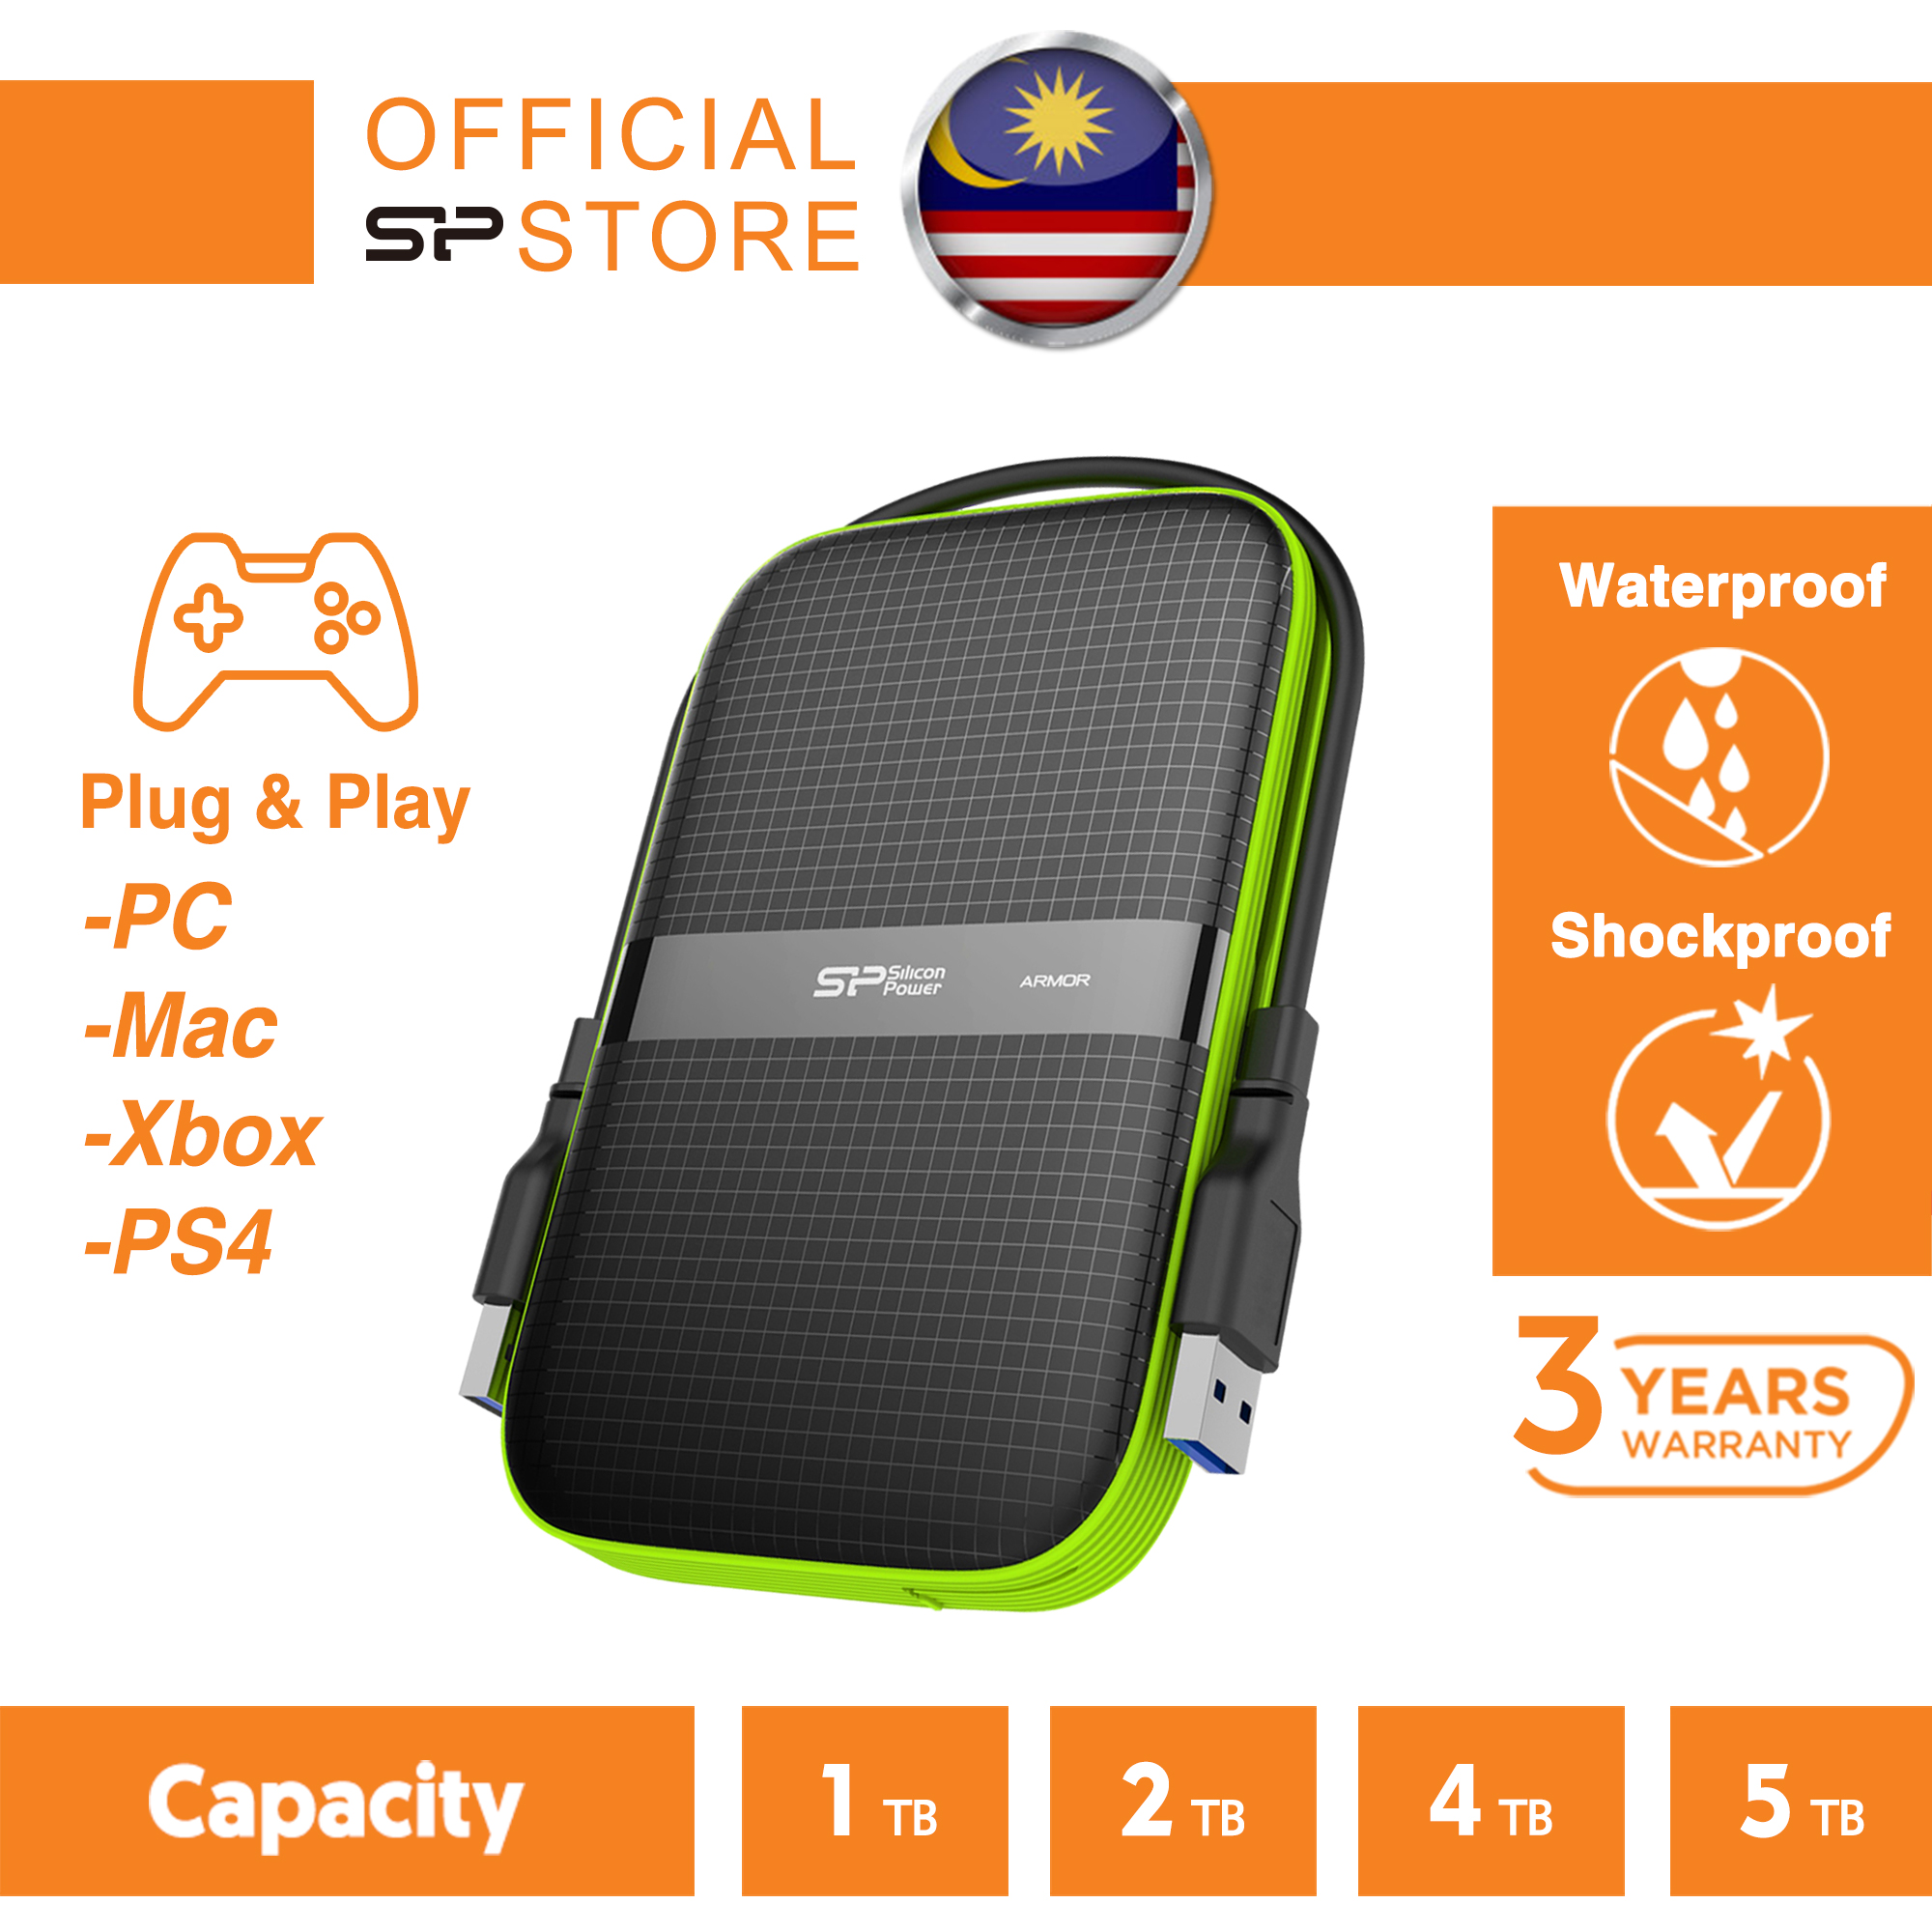 Mac Xbox and PS4 Shockproof USB 3.0 for PC Silicon Power Black 1TB Rugged Portable External Hard Drive Armor A60 Black 